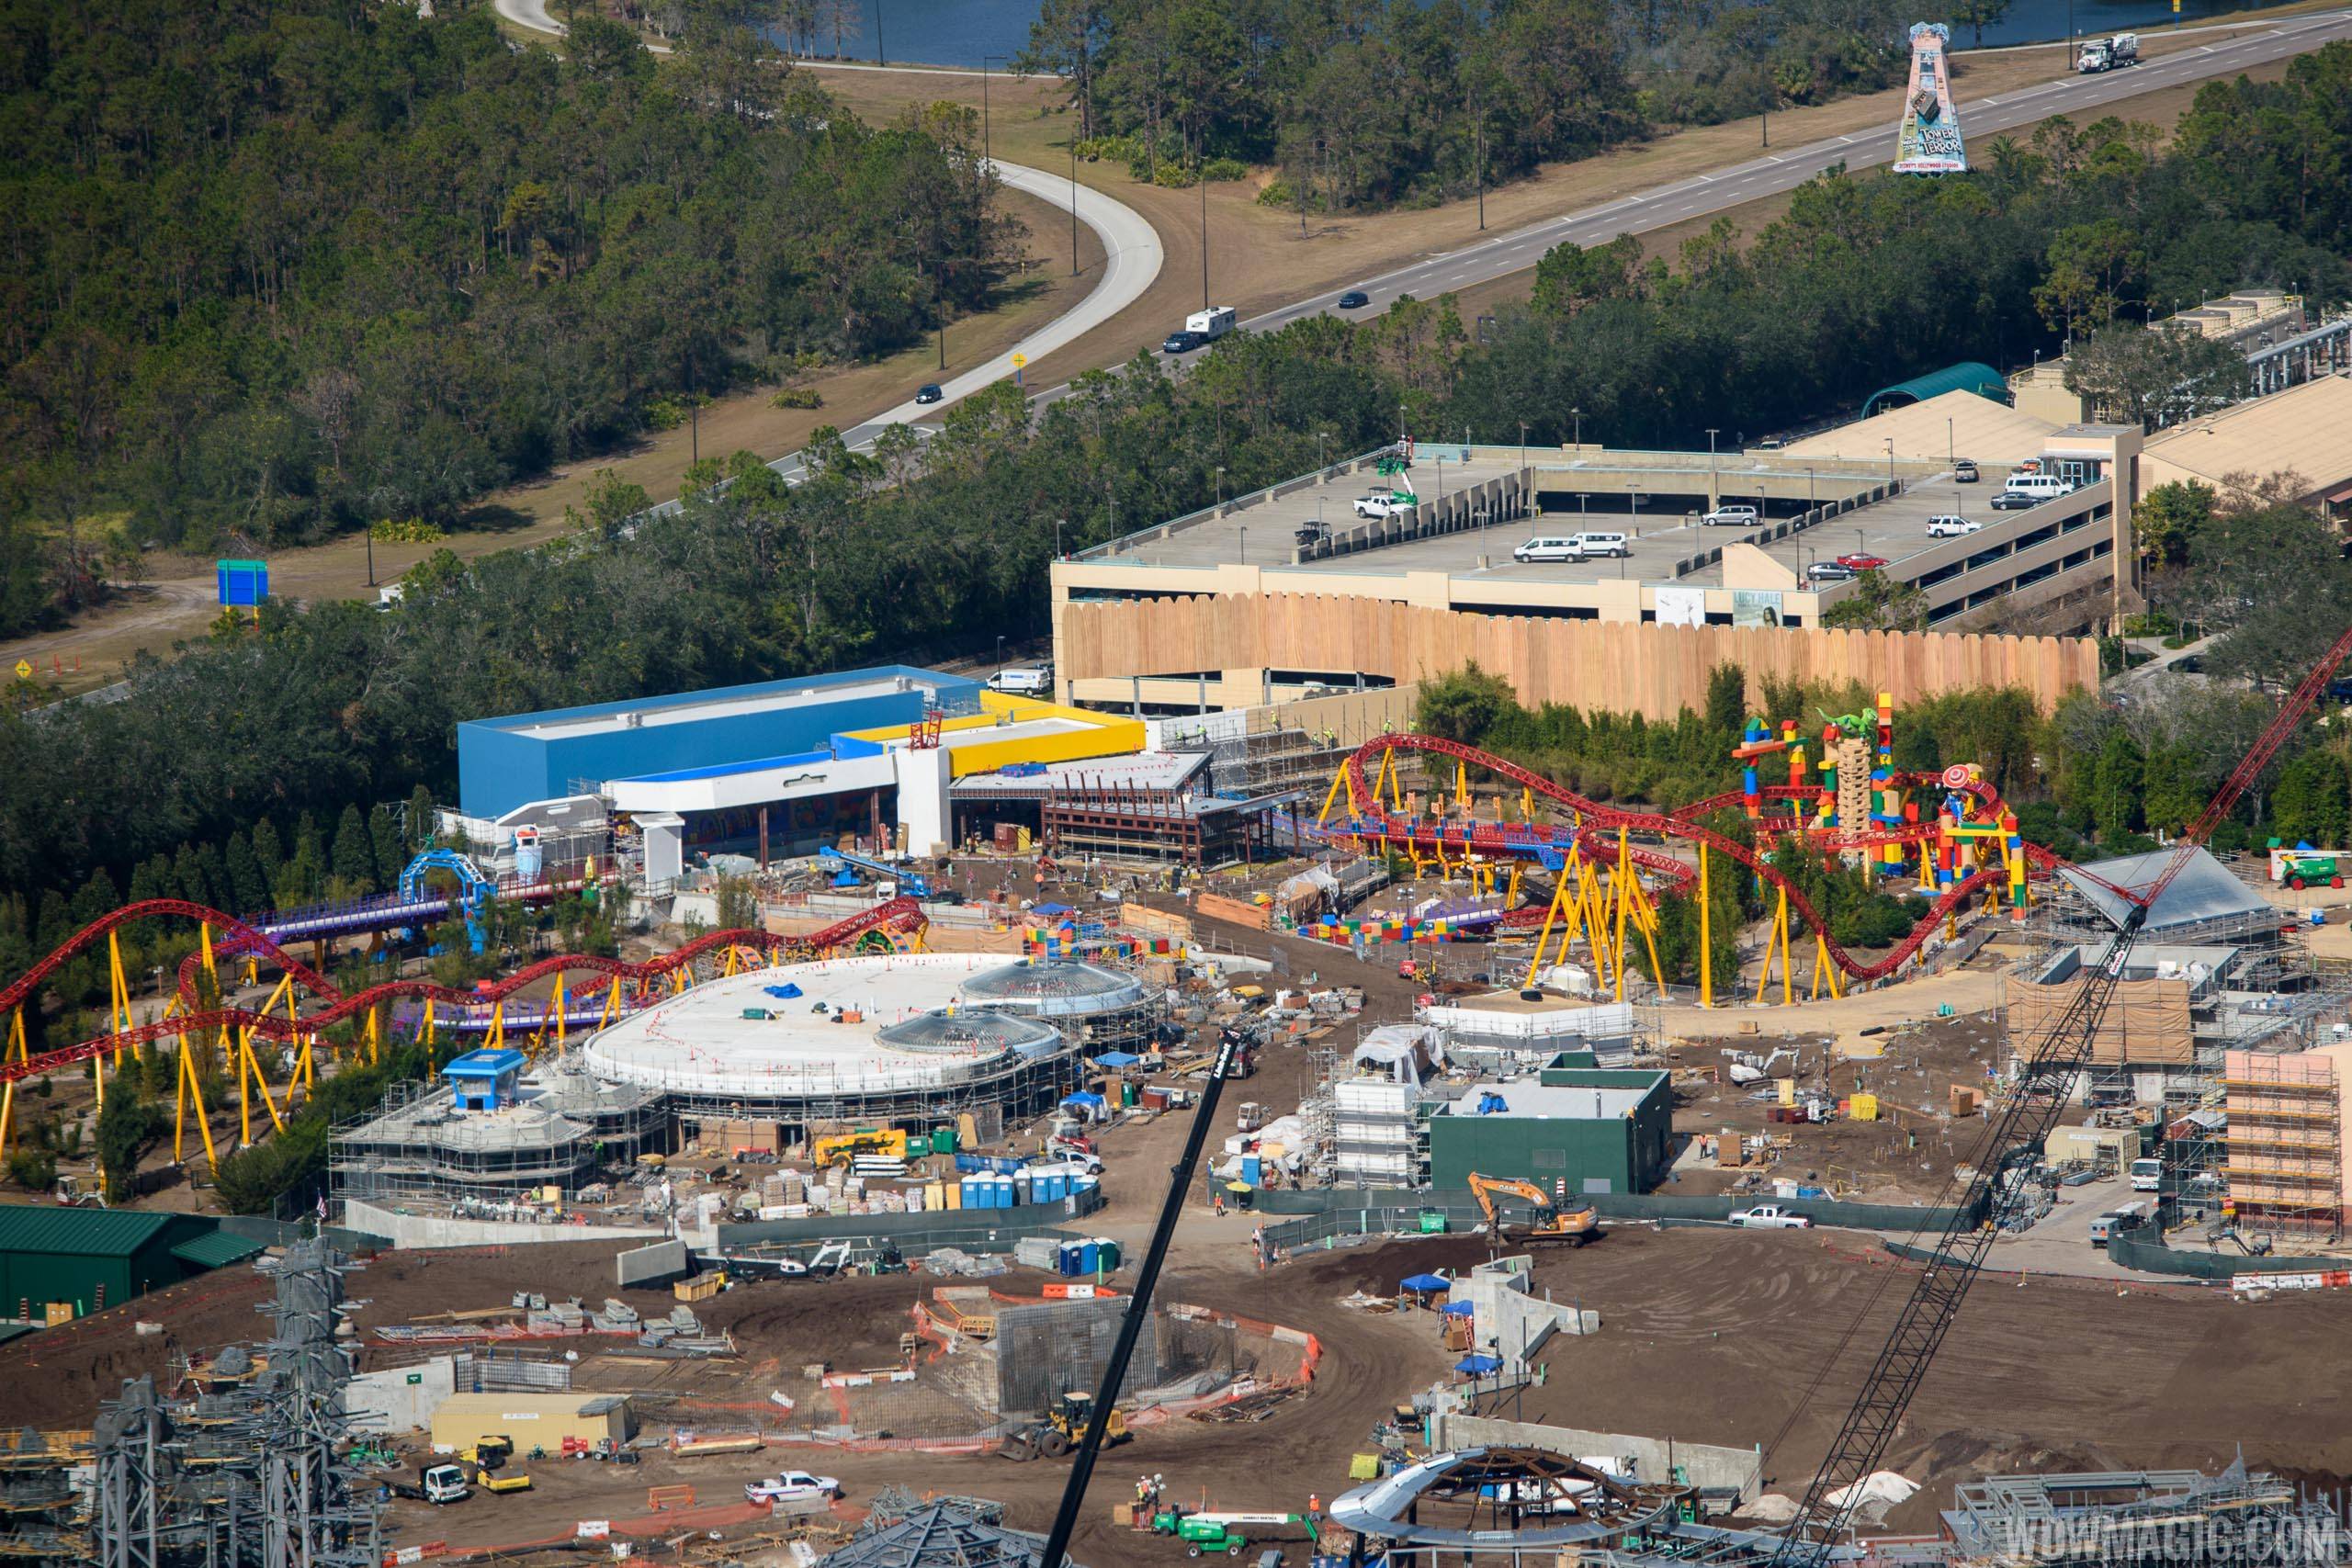 Wide aerial view of Toy Story Land 